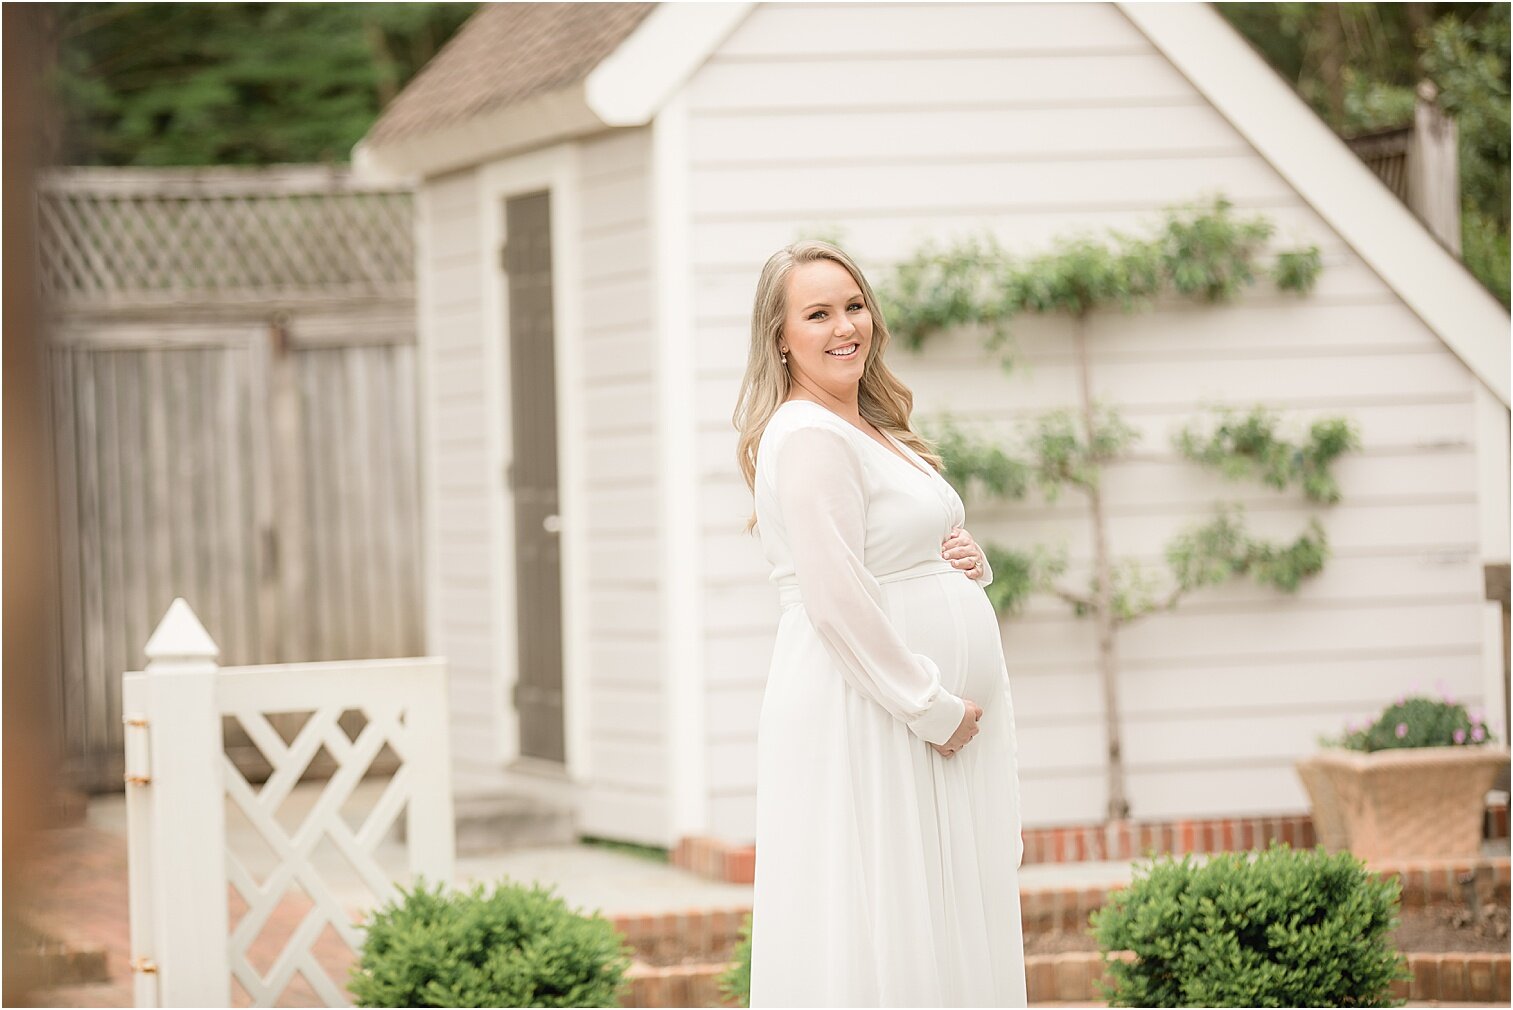 Maternity Photography by Angie Lansdon Photography 00021.jpg